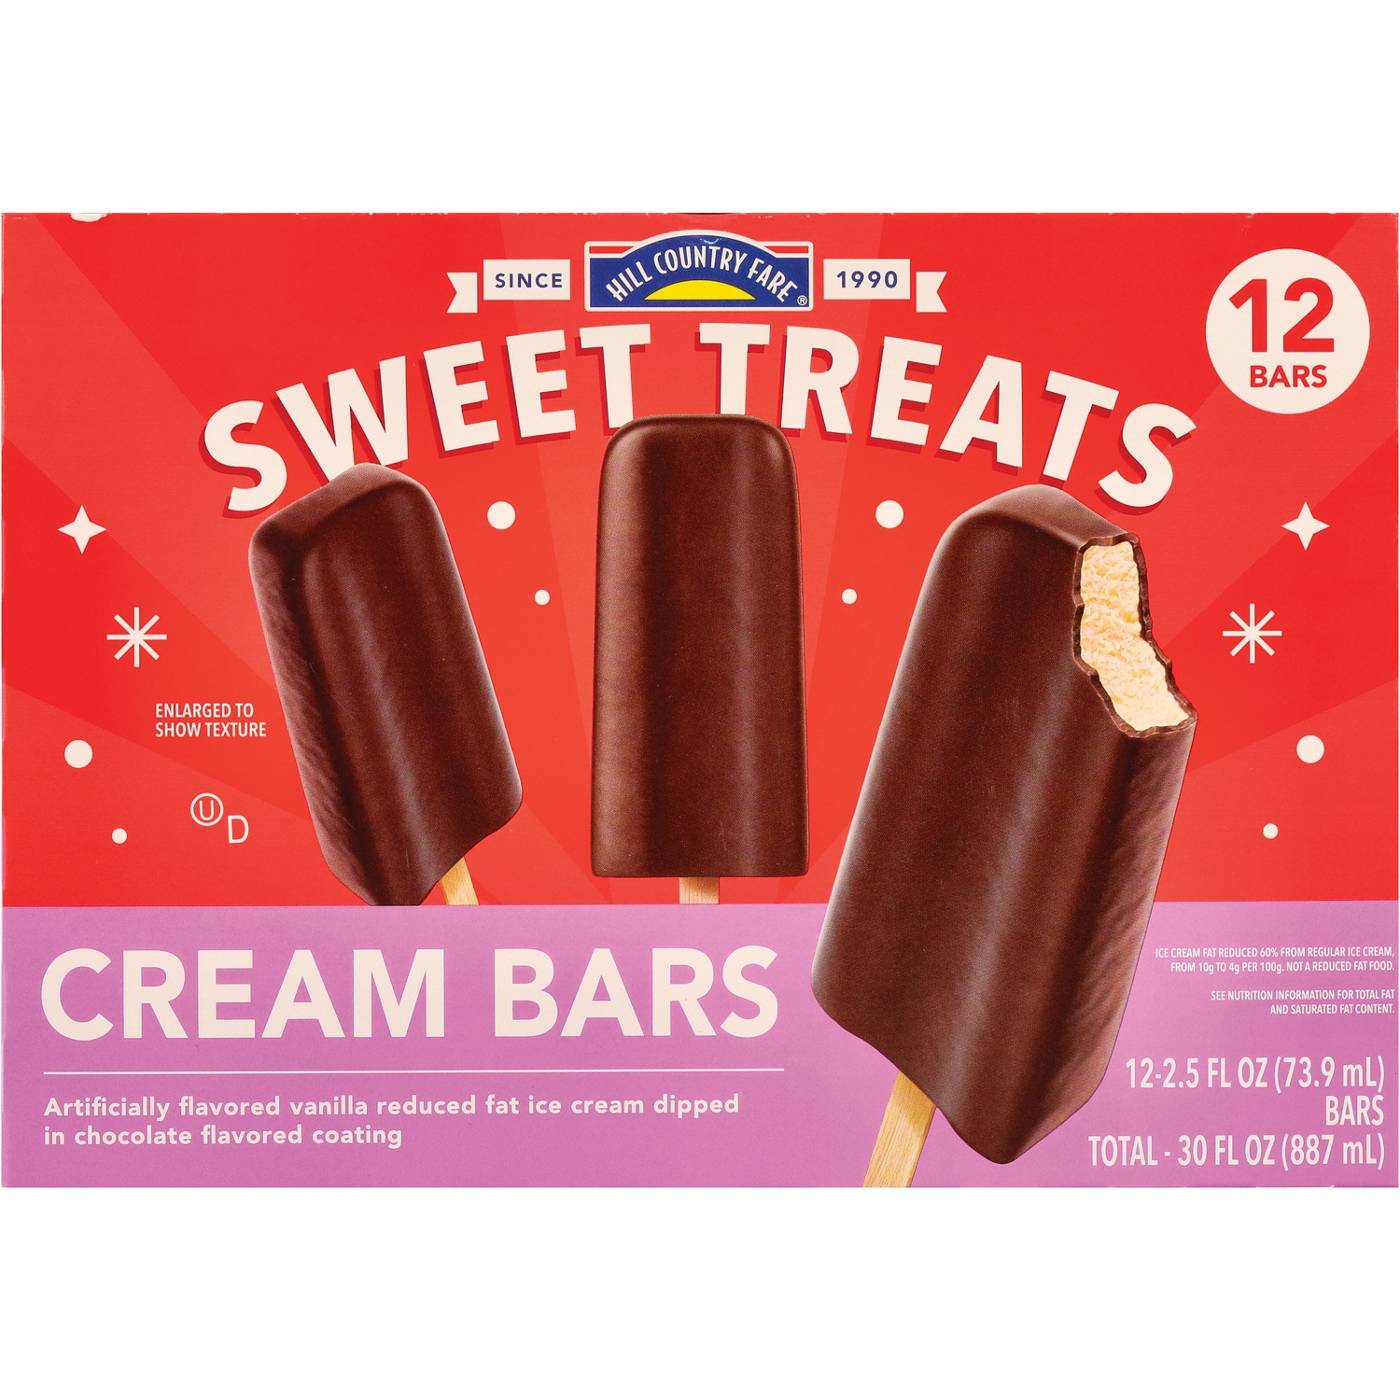 Hill Country Fare Sweet Treats Ice Cream Bars; image 1 of 2